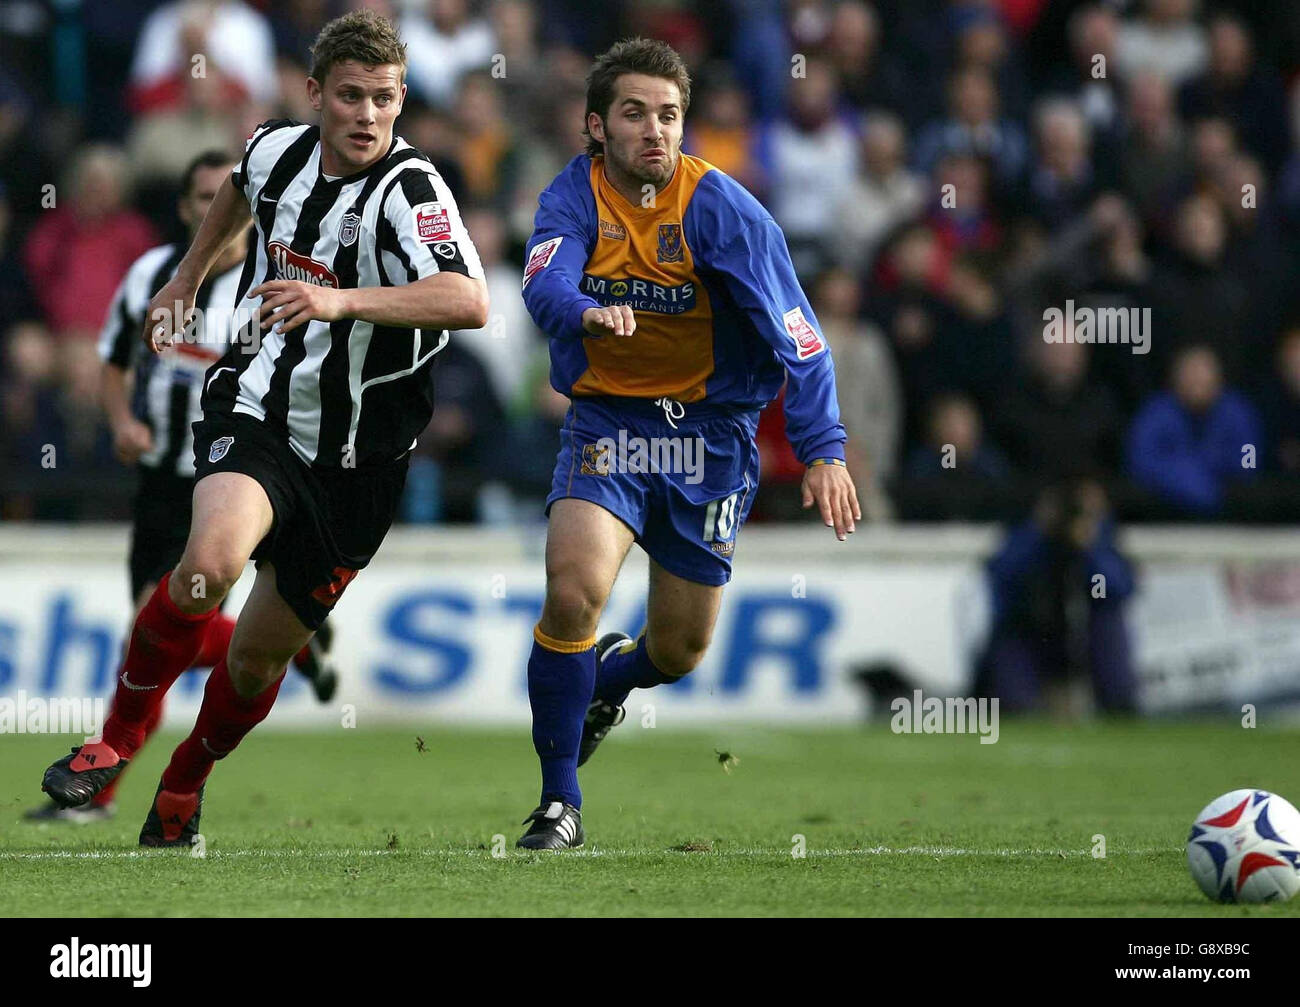 Grimsby's Simon Francis (L) battles for the ball with Shrewsbury's Ben Smith during the Coca-Cola League Two match at Gay Meadow, Shrewsbury, Saturday October 1, 2005. PRESS ASSOCIATION Photo. Photo credit should read: Malcolm Couzens/PA. NO UNOFFICIAL CLUB WEBSITE USE. Stock Photo